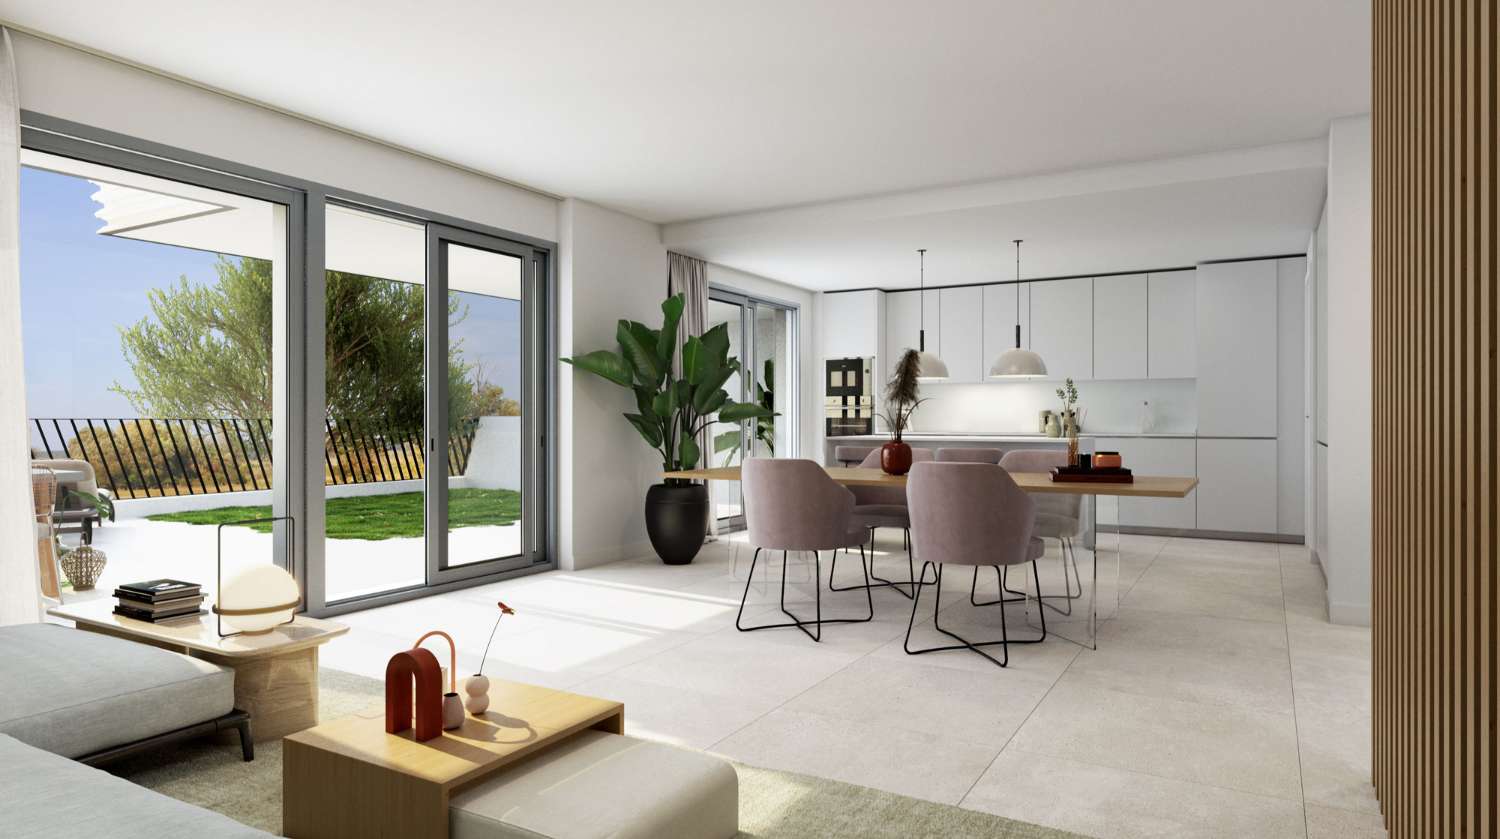 Exclusive luxury townhouses with panoramic sea views in the Chaparral natural park, Mijas Costa